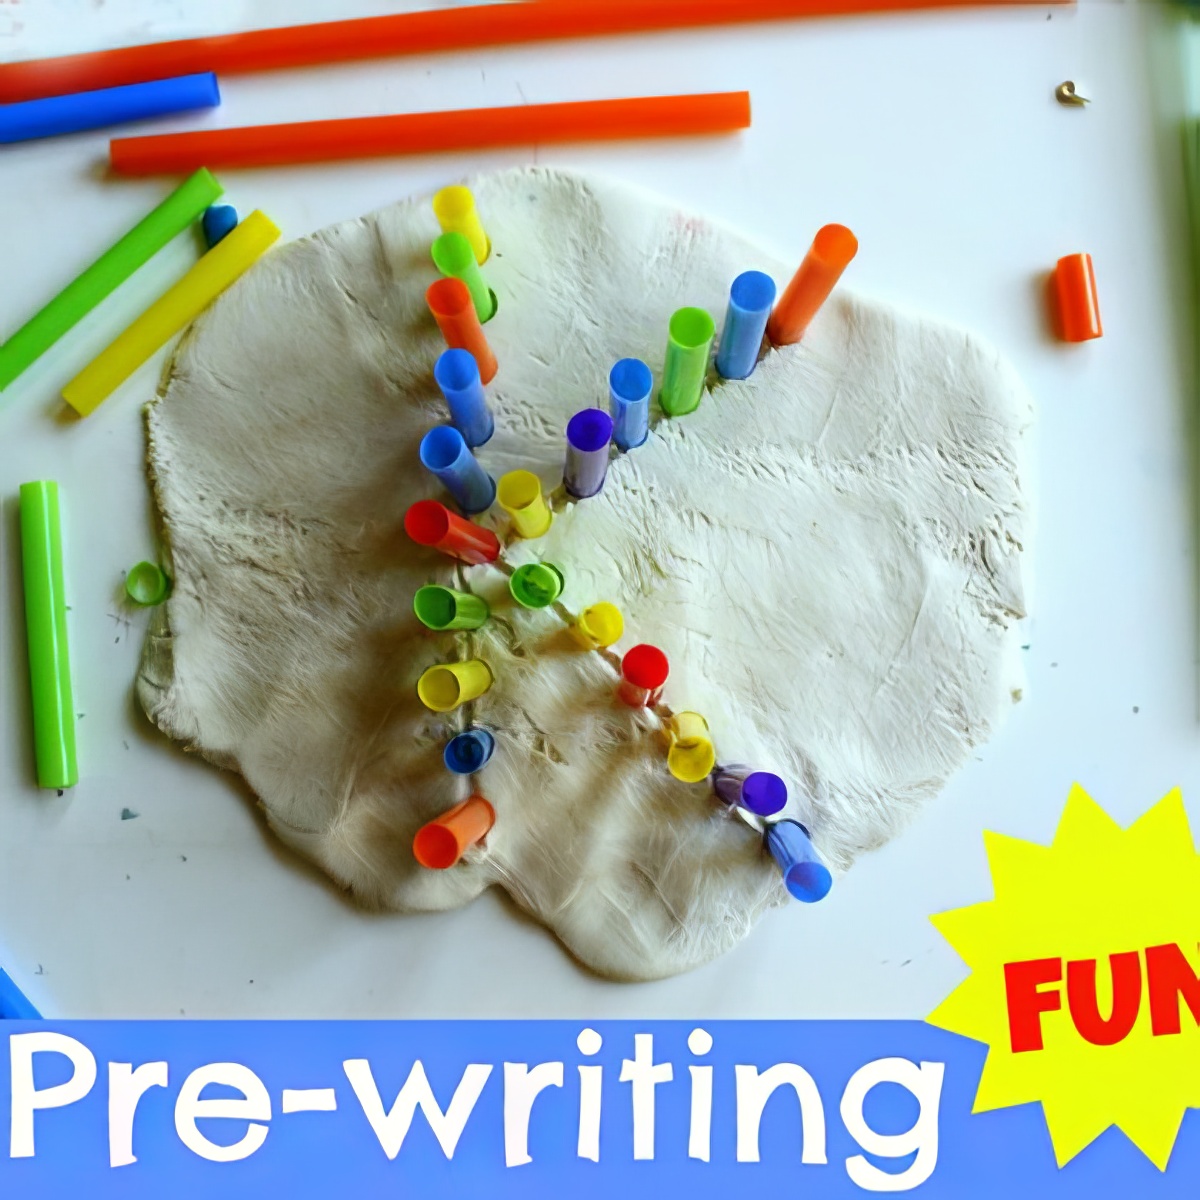 prewriting-001, learning activities for 2-year-olds